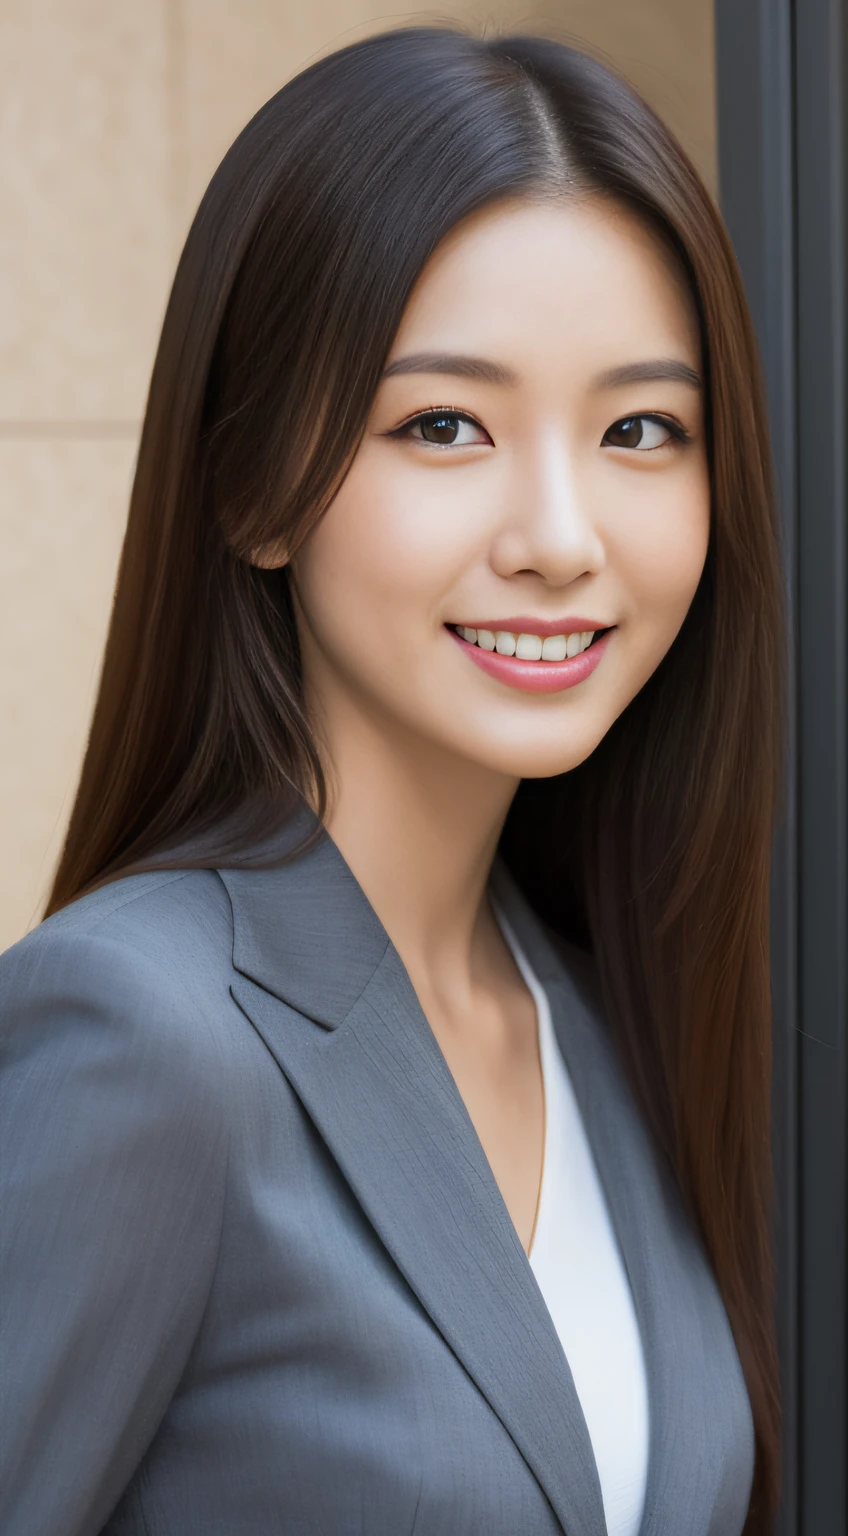 Asian woman in suit posing for one photo, A smile、One girl in a suit,Close-up portrait taken in a single photo, closeup portrait shot,  Wearing a gray business suit, professional closeup photo, full body Esbian、 is wearing  jacket, close up half body shot, Japanese Models, close up portrait photo、Detailed background